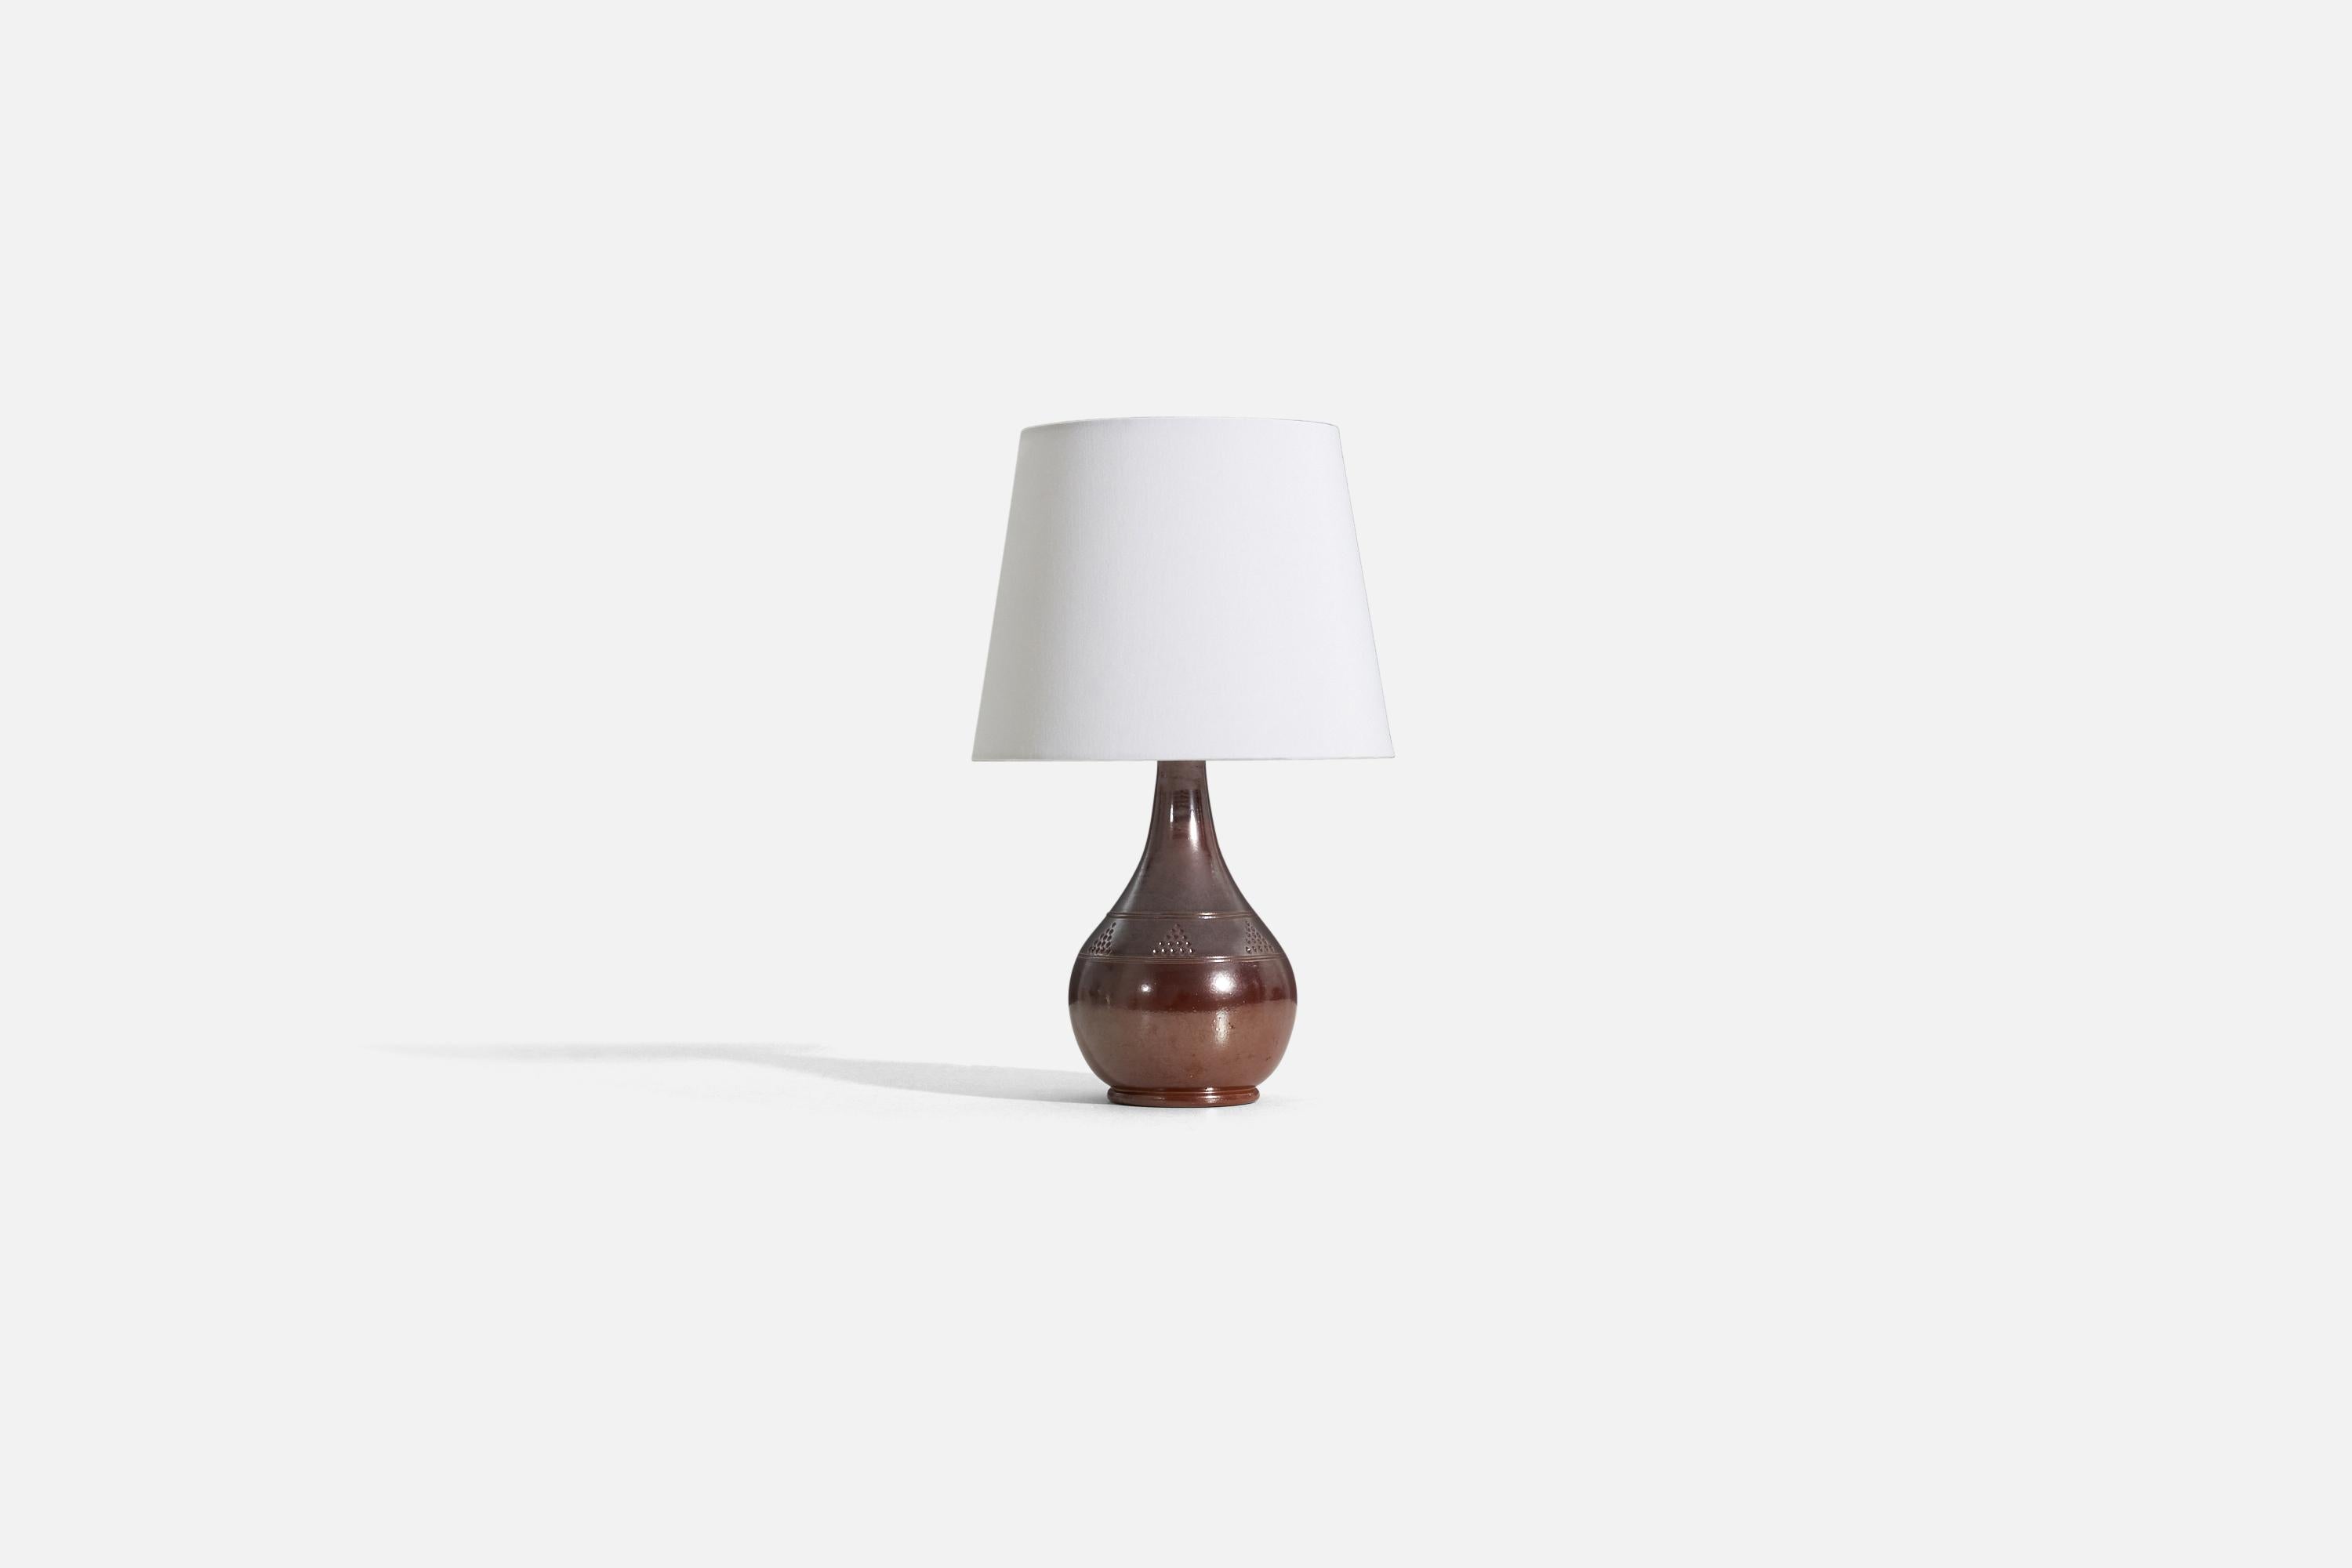 A brown glazed table lamp designed by Karl Persson for Höganäs Keramik, Sweden, c. 1940s.

Sold without lampshade. 

Dimensions of lamp (inches) : 12.25 x 5.25 x 5.25 (H x W x D).
Dimensions shade (inches) : 7.5 x 10 x 8 (T x B x H).
Dimension